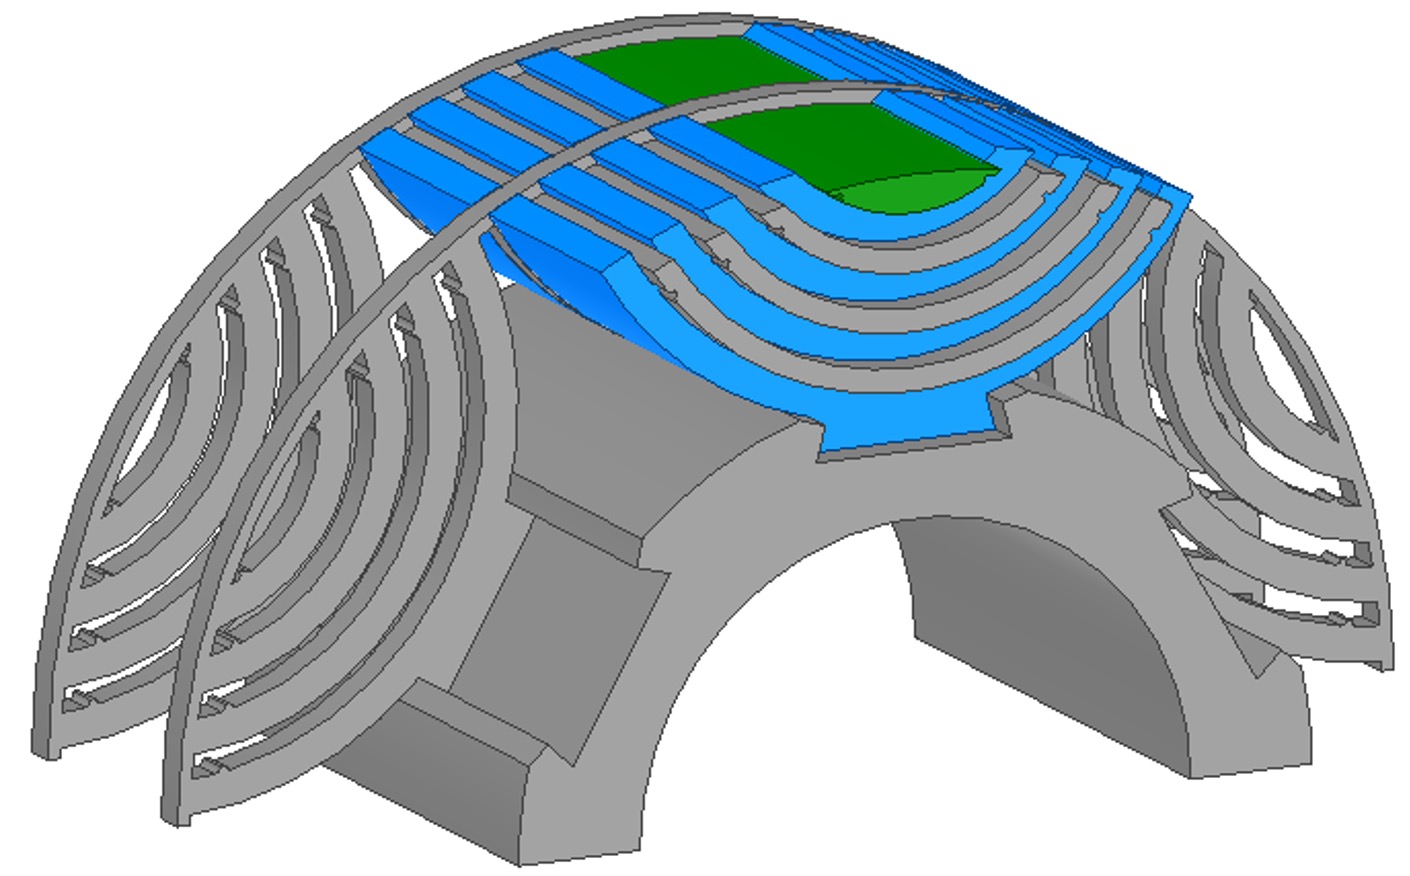 Rotor structural design. Blue pieces are rotor laminations. Grey and green parts are non-magnetic light strong supporting materials